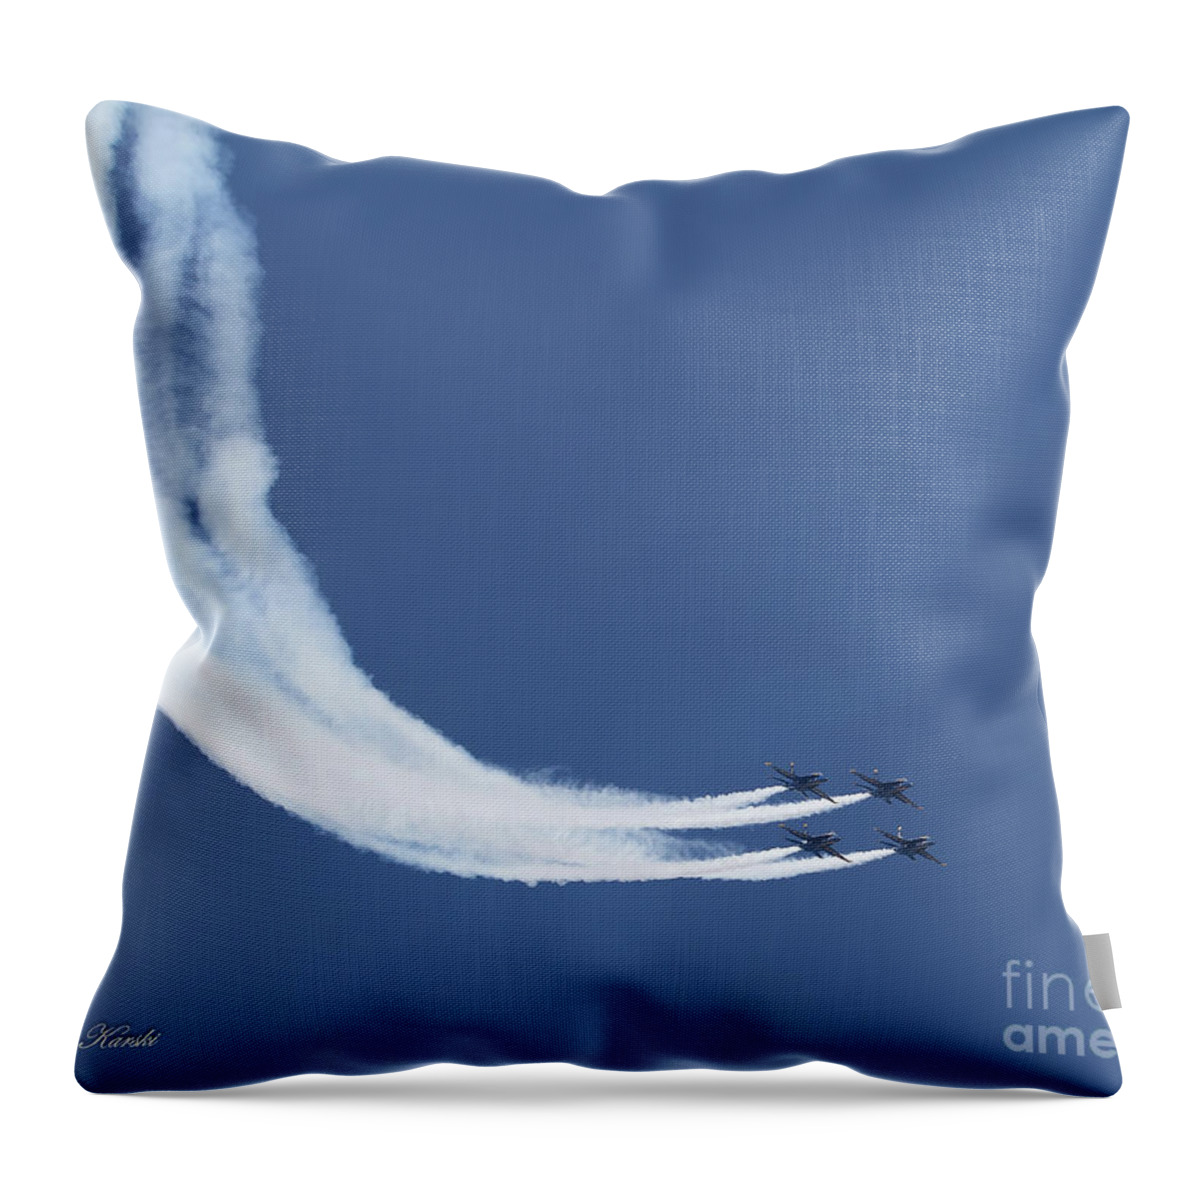 Airshow Throw Pillow featuring the photograph Tight Curve by Sue Karski